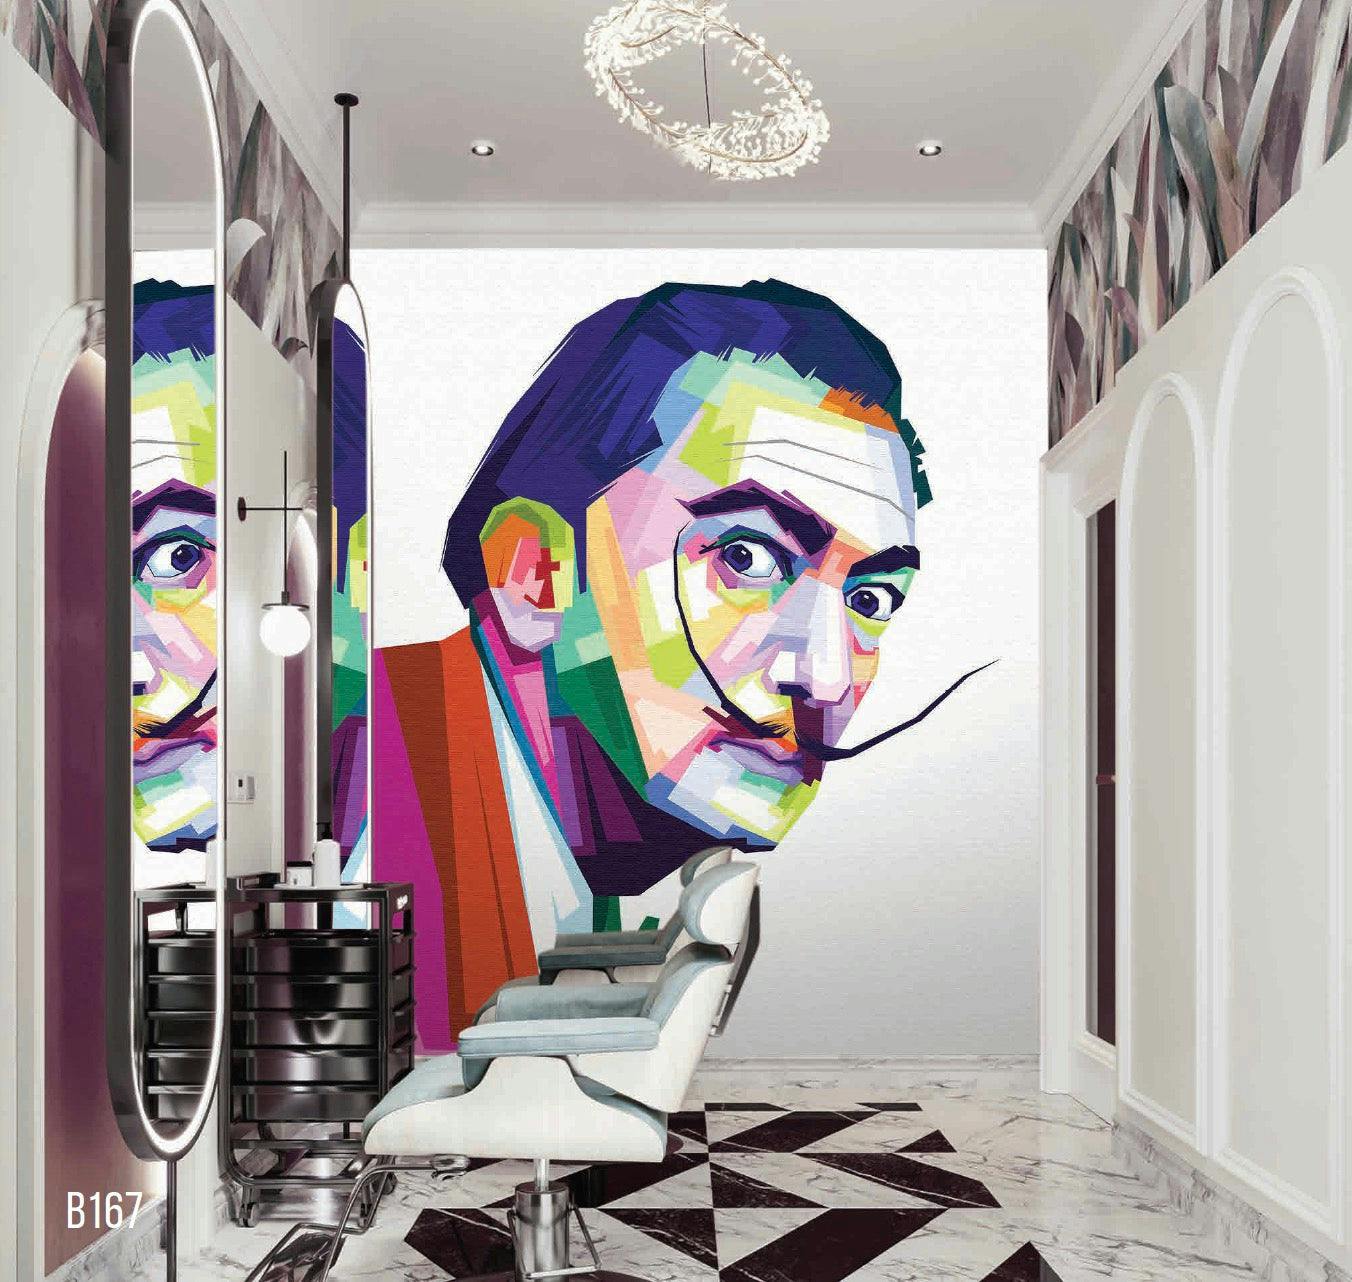 mural of drawn man with long moustache looking towards camera in multi colors